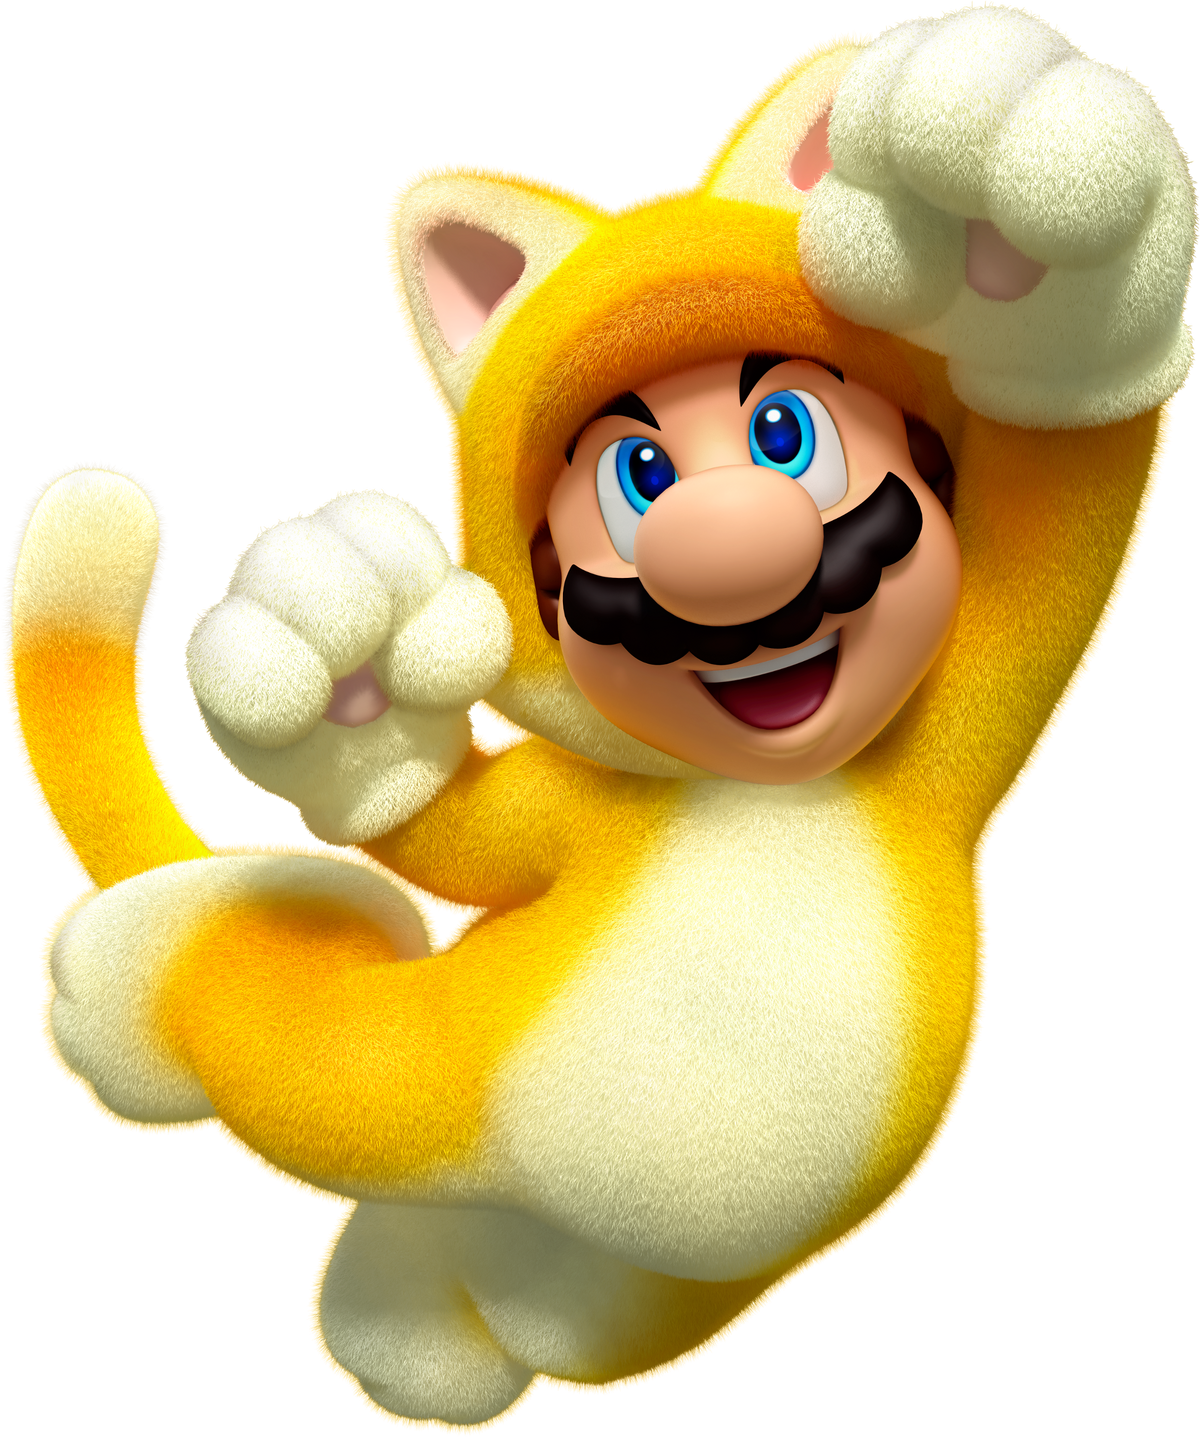 CAT MARIO free online game on